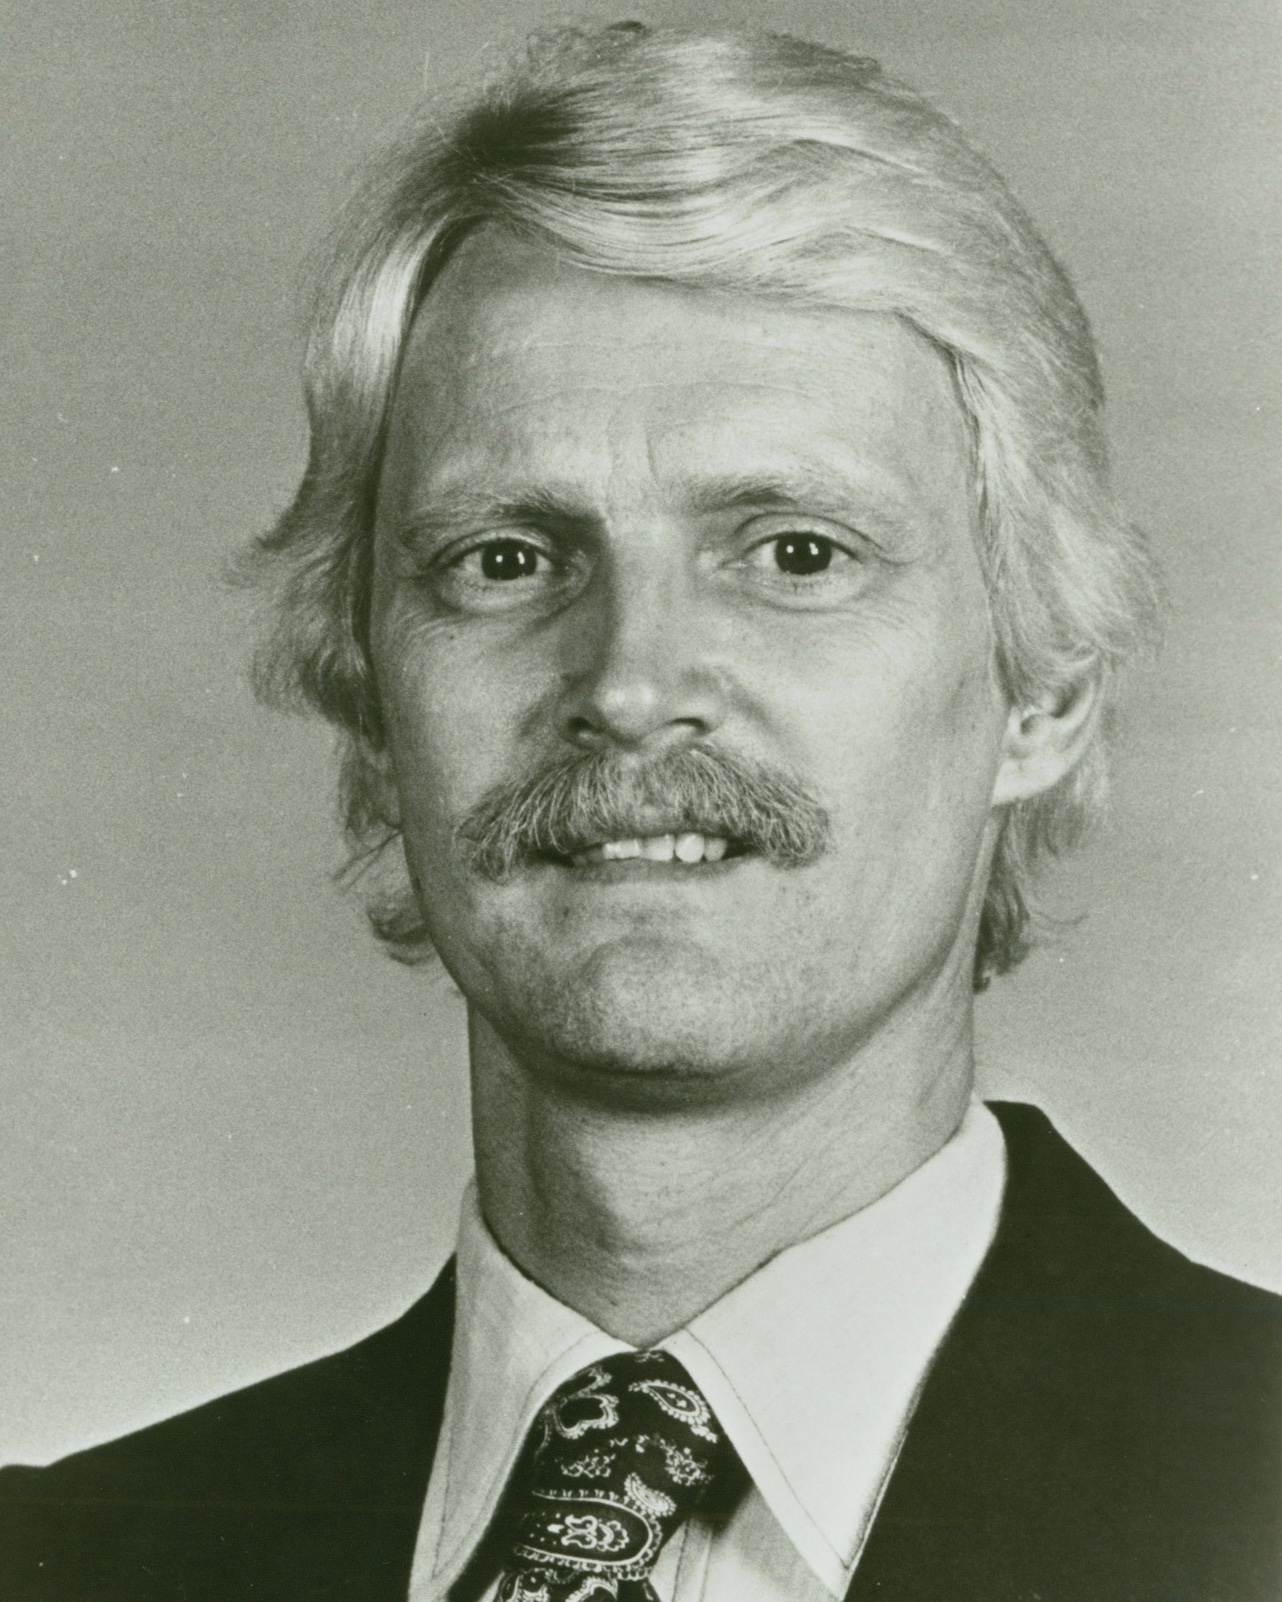 A black and white photograph of a white man with blonde hair and a mustache wearing a suit and paisley tie.